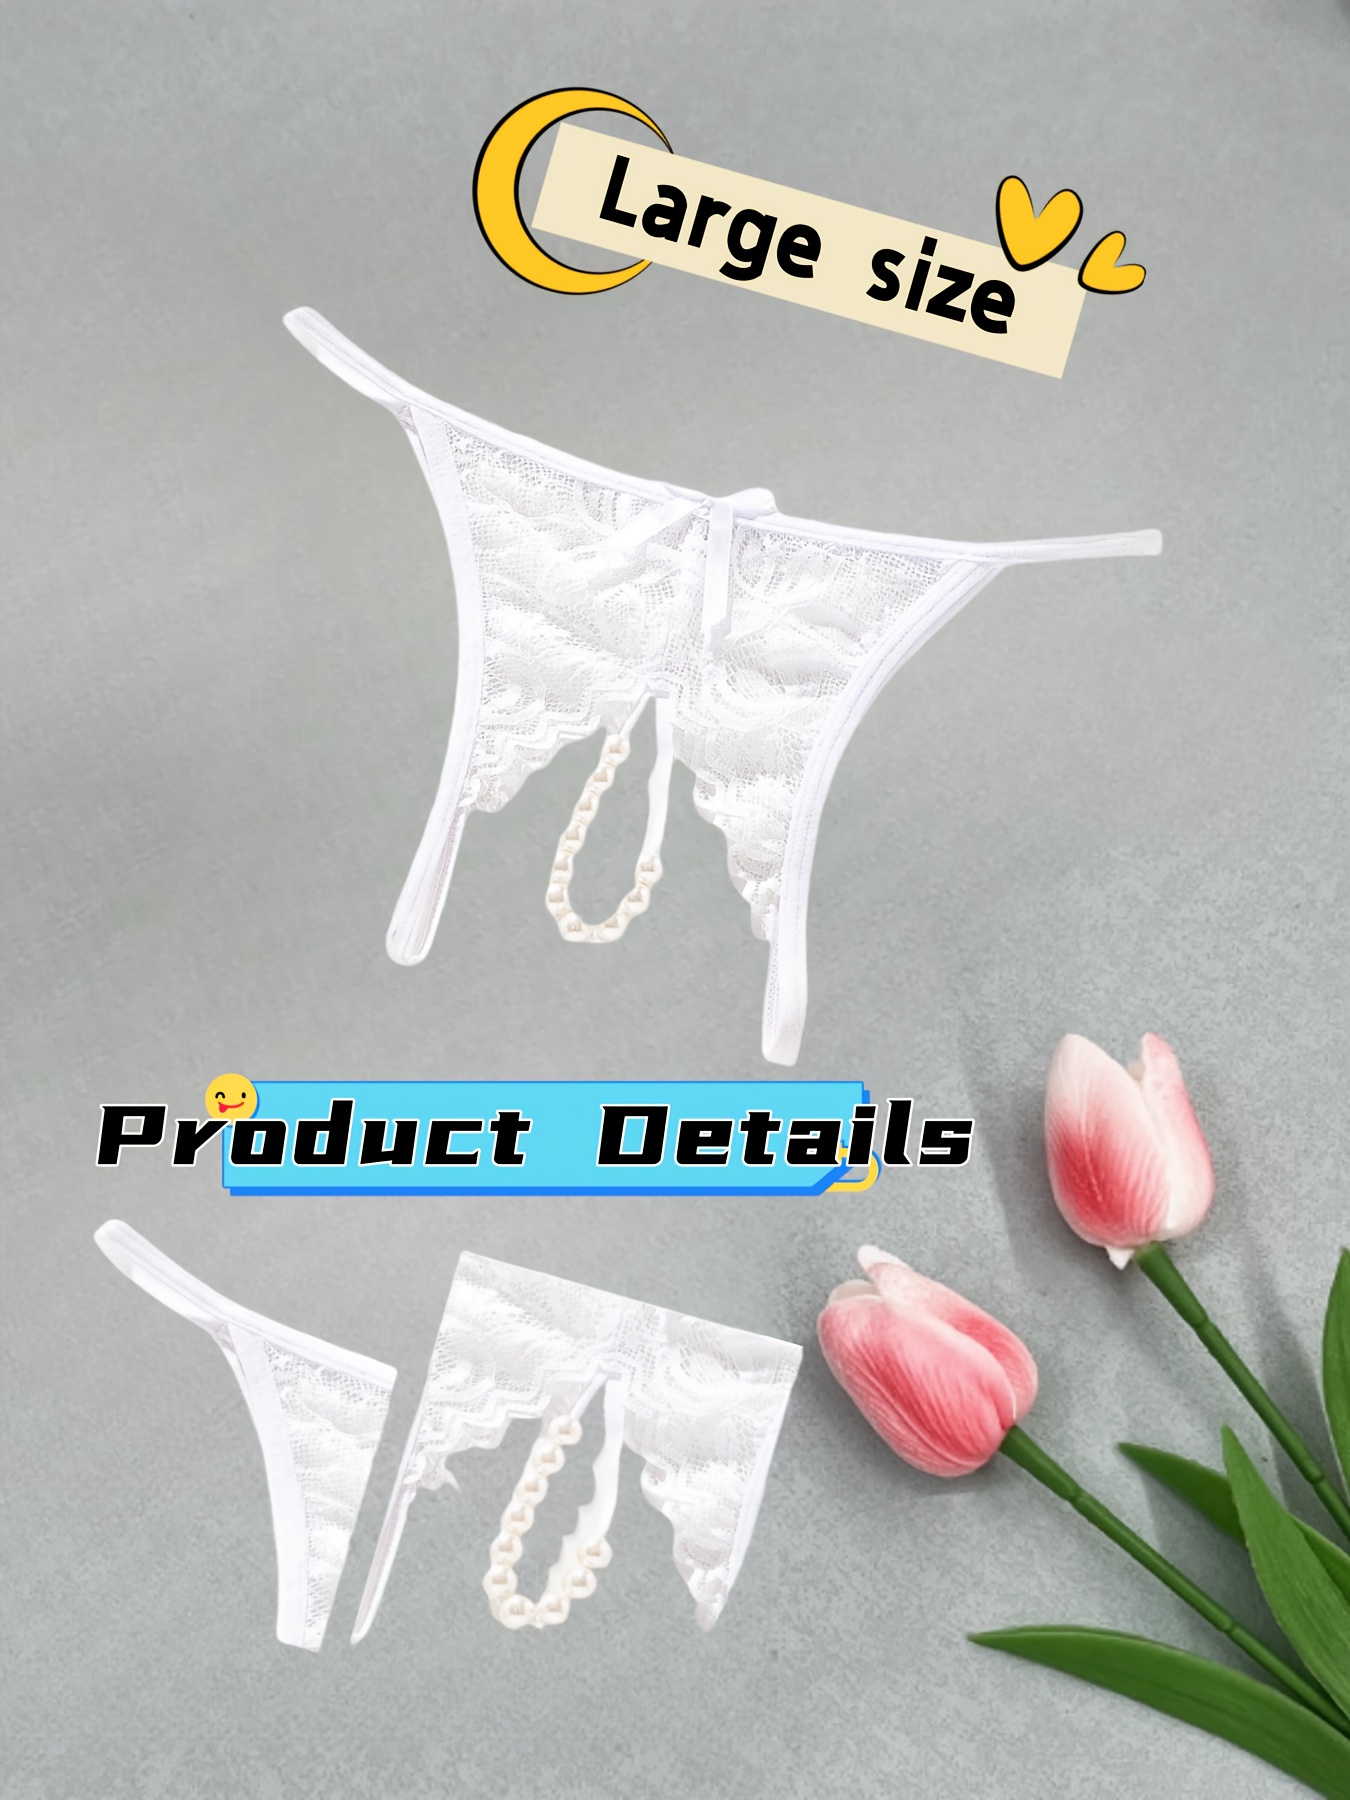 2-Pack Thong - Nude